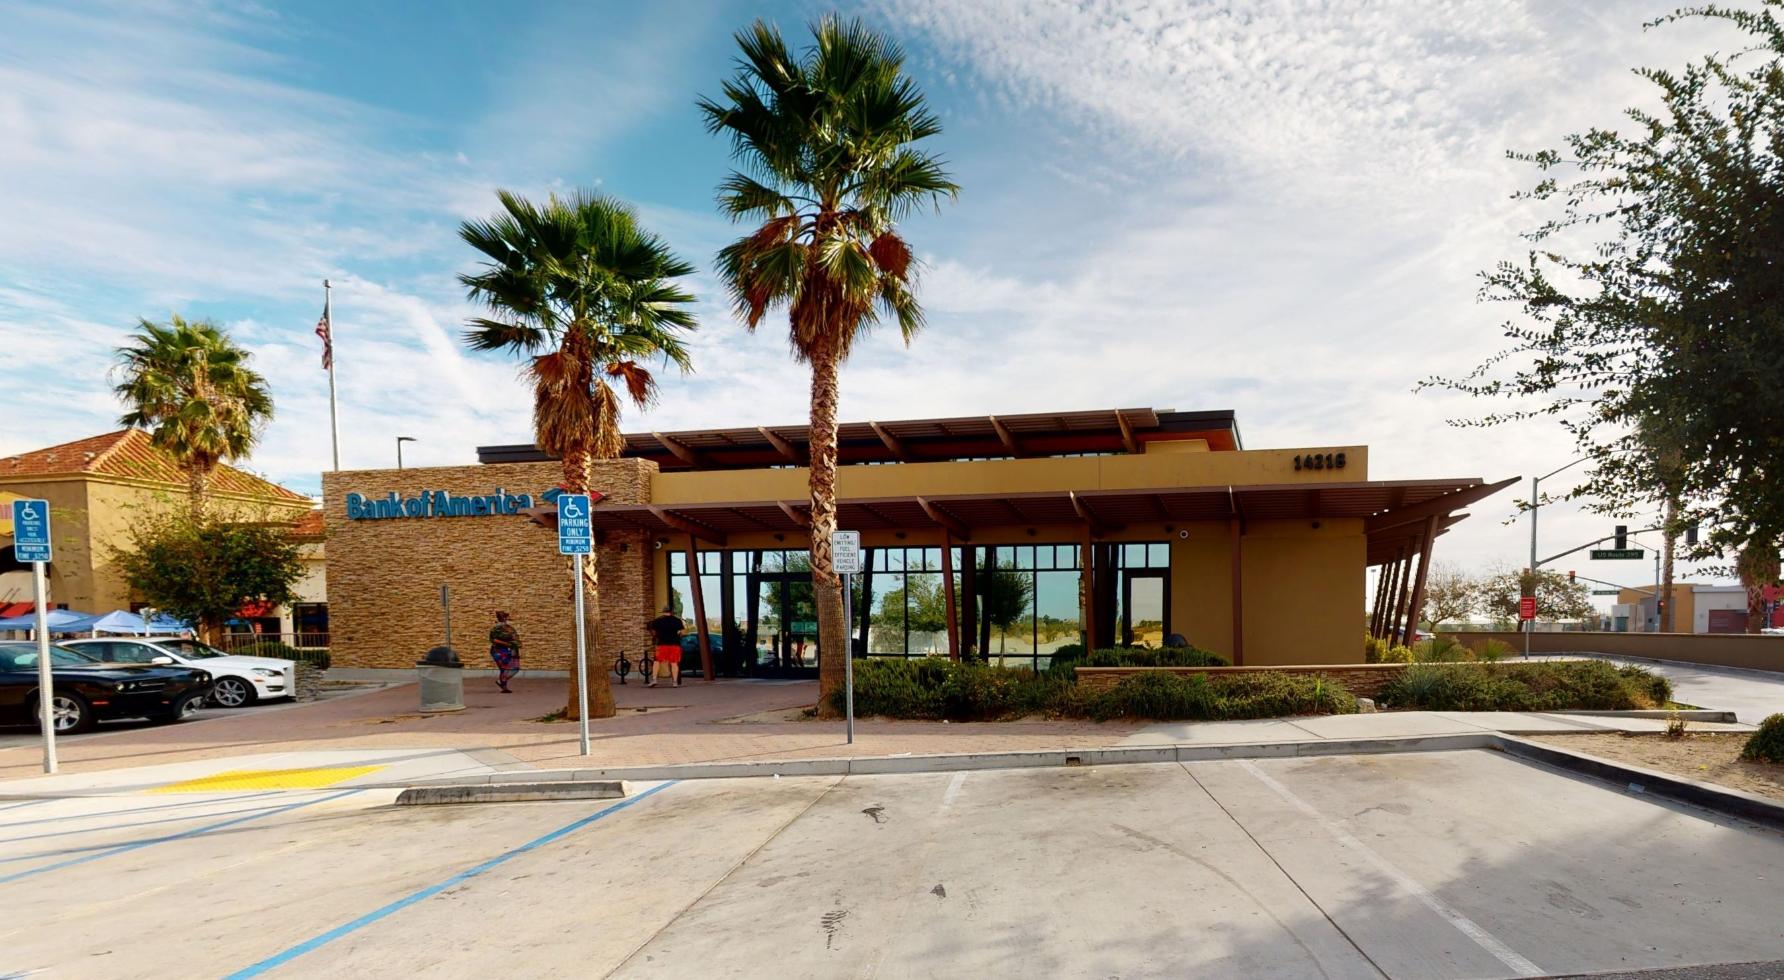 Bank of America financial center with drive-thru ATM | 14218 Highway 395, Adelanto, CA 92301